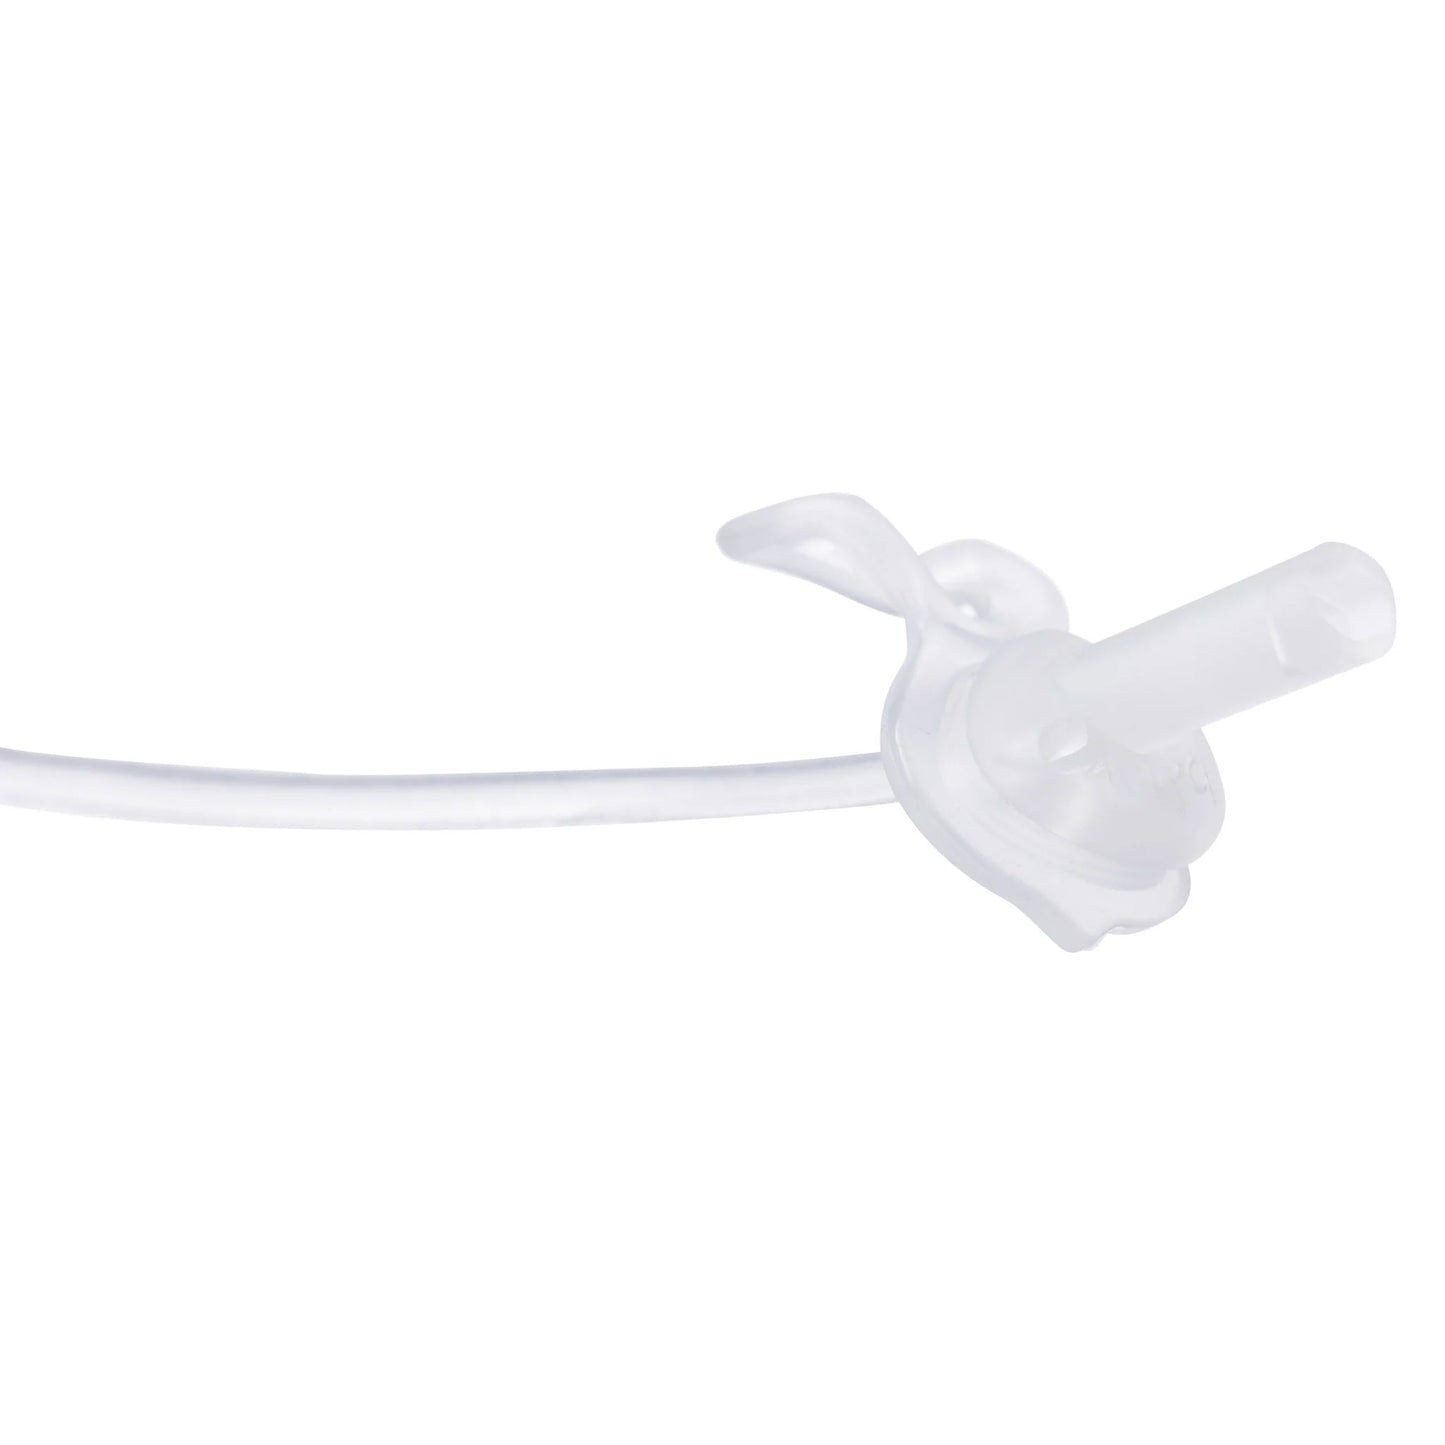 b.box Sippy Cup Replacement Straw & Cleaner